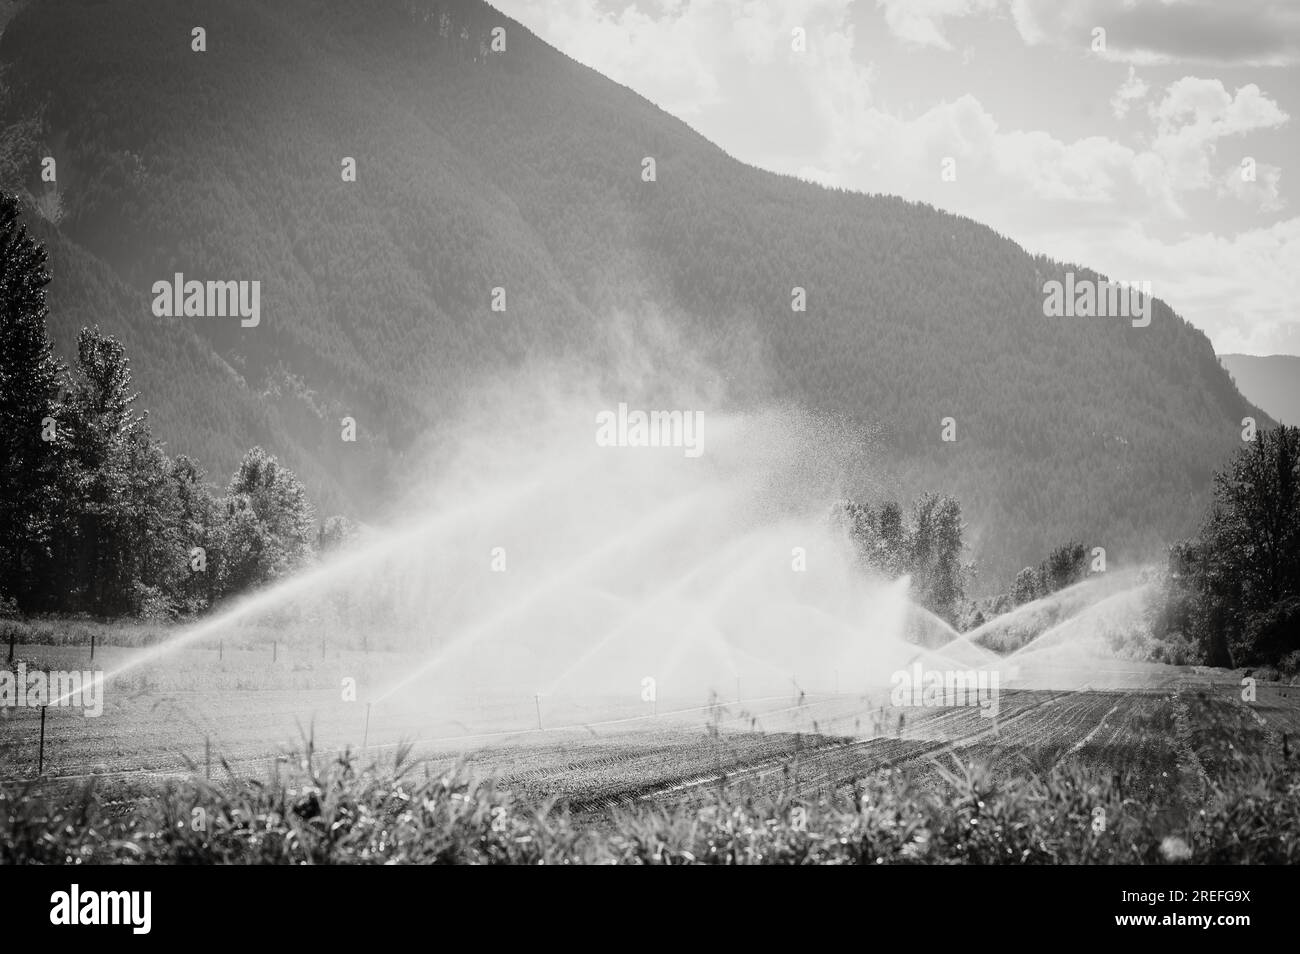 Irrigation sprinklers at the North Arm Organic Farm.   Pemberton BC, Canada.  Black and white image. Stock Photo